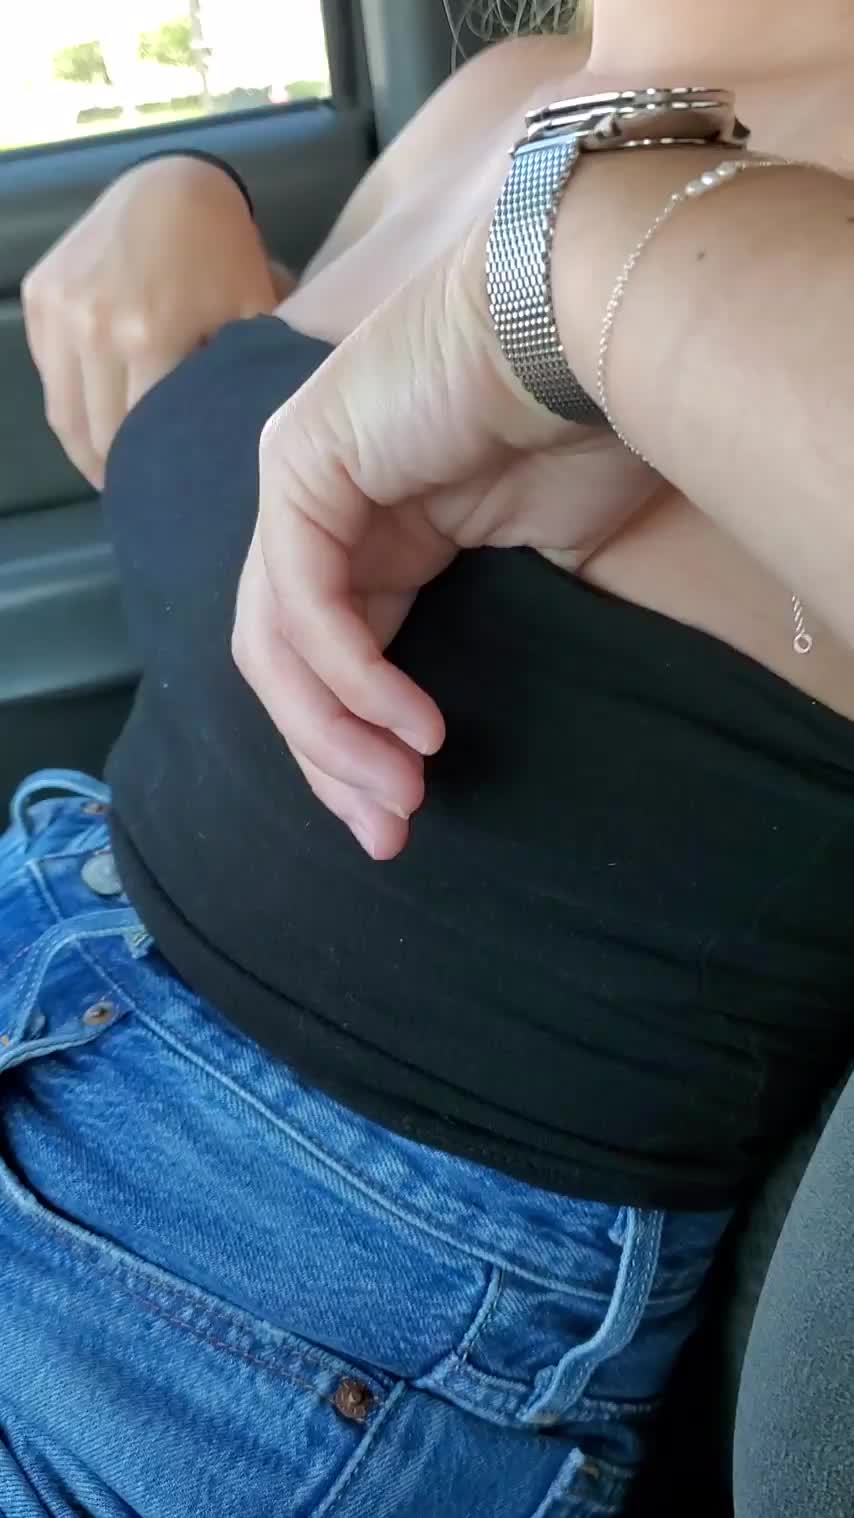 Let's worship some perky tits on the blessed day! : video clip